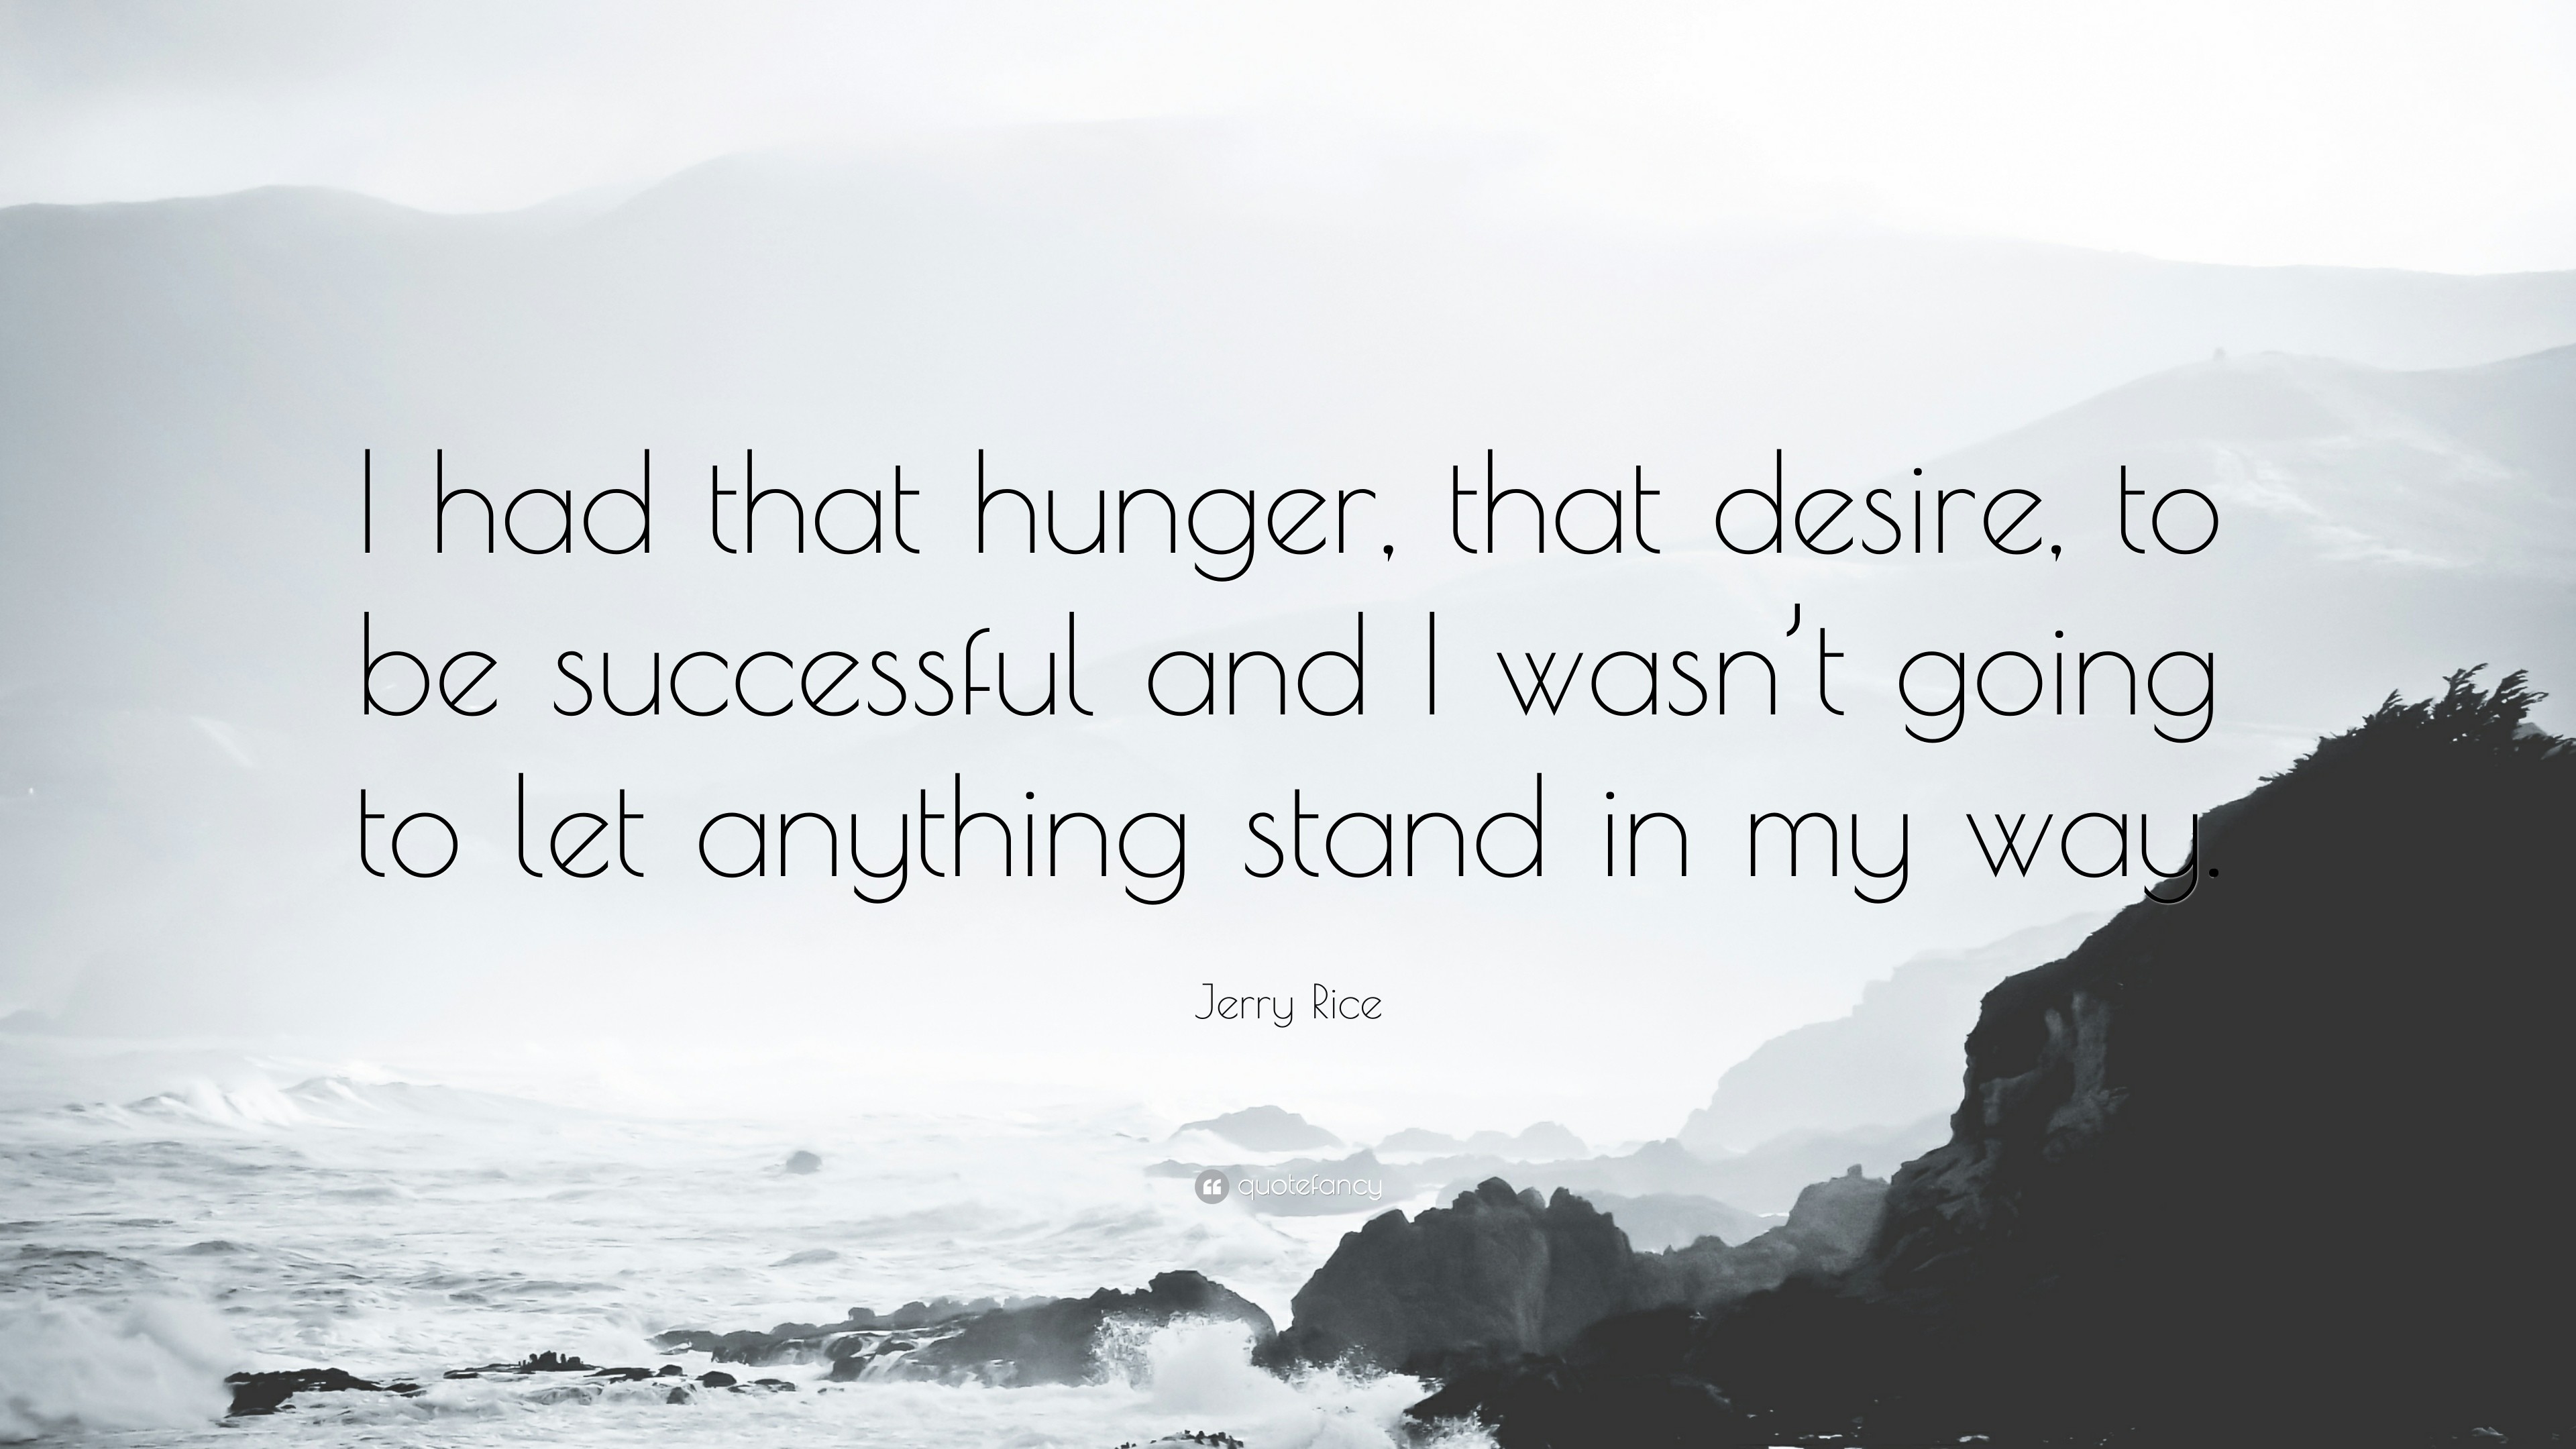 Jerry Rice Quote I had that hunger, that desire, to be successful